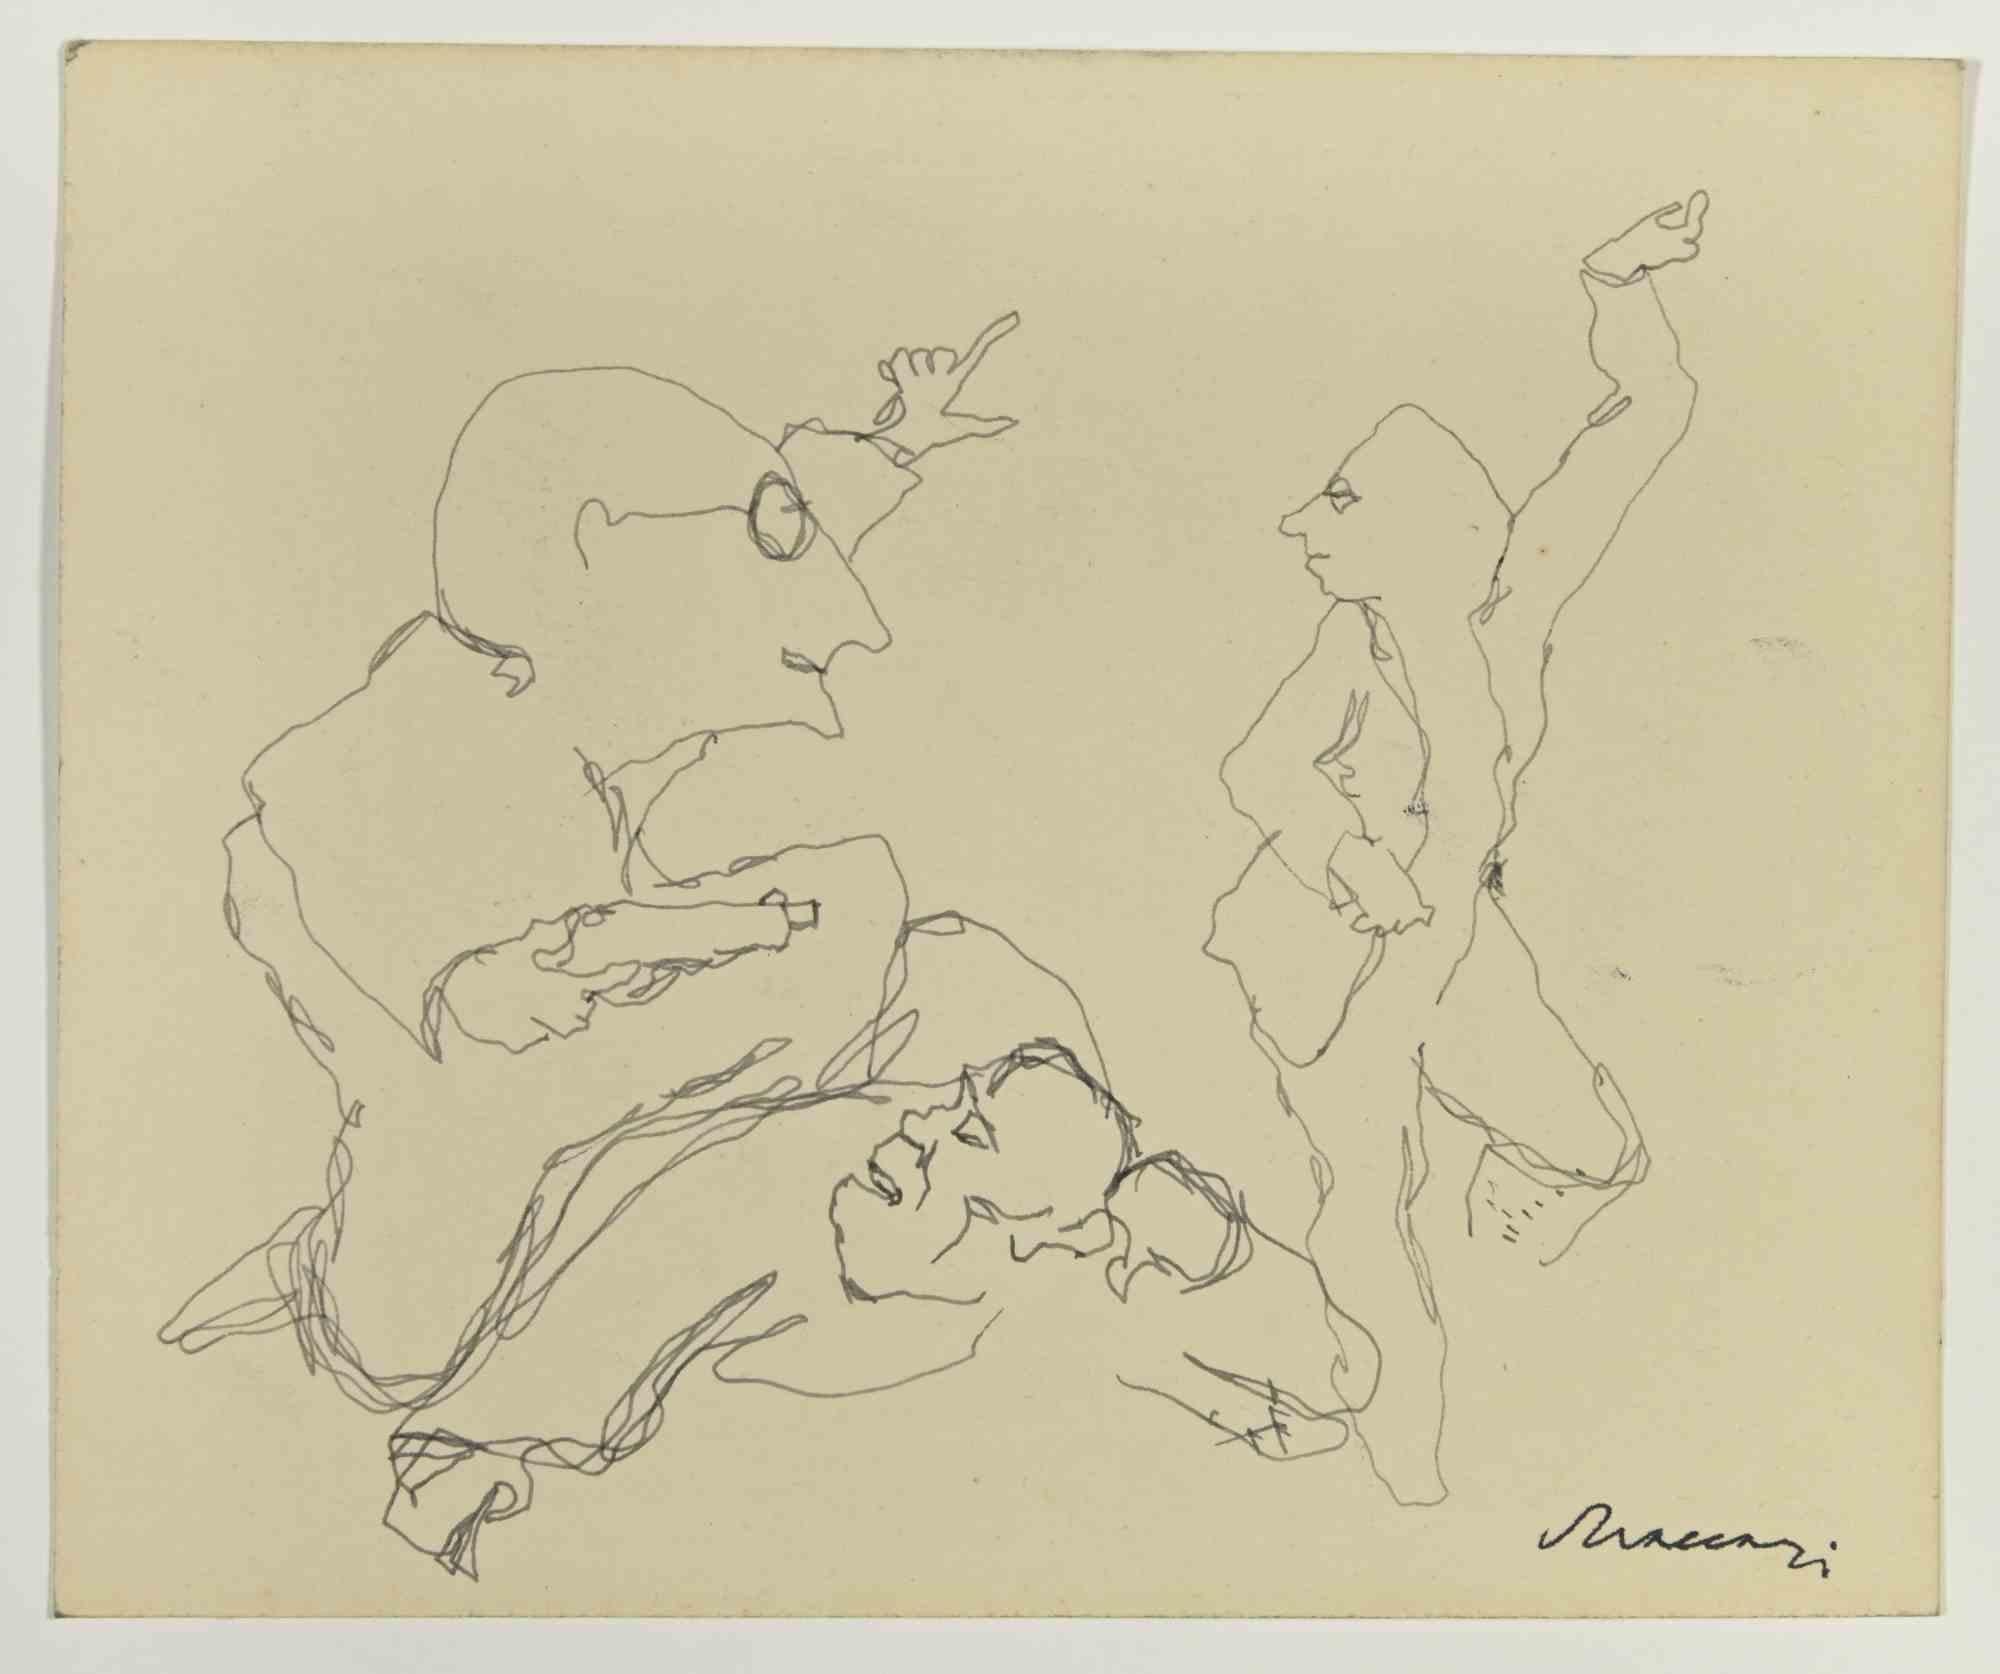 Figures is a pen Drawing realized by Mino Maccari  (1924-1989) in the 1960s.

Hand-signed on the lower.

Good conditions.

Mino Maccari (Siena, 1924-Rome, June 16, 1989) was an Italian writer, painter, engraver and journalist, winner of the